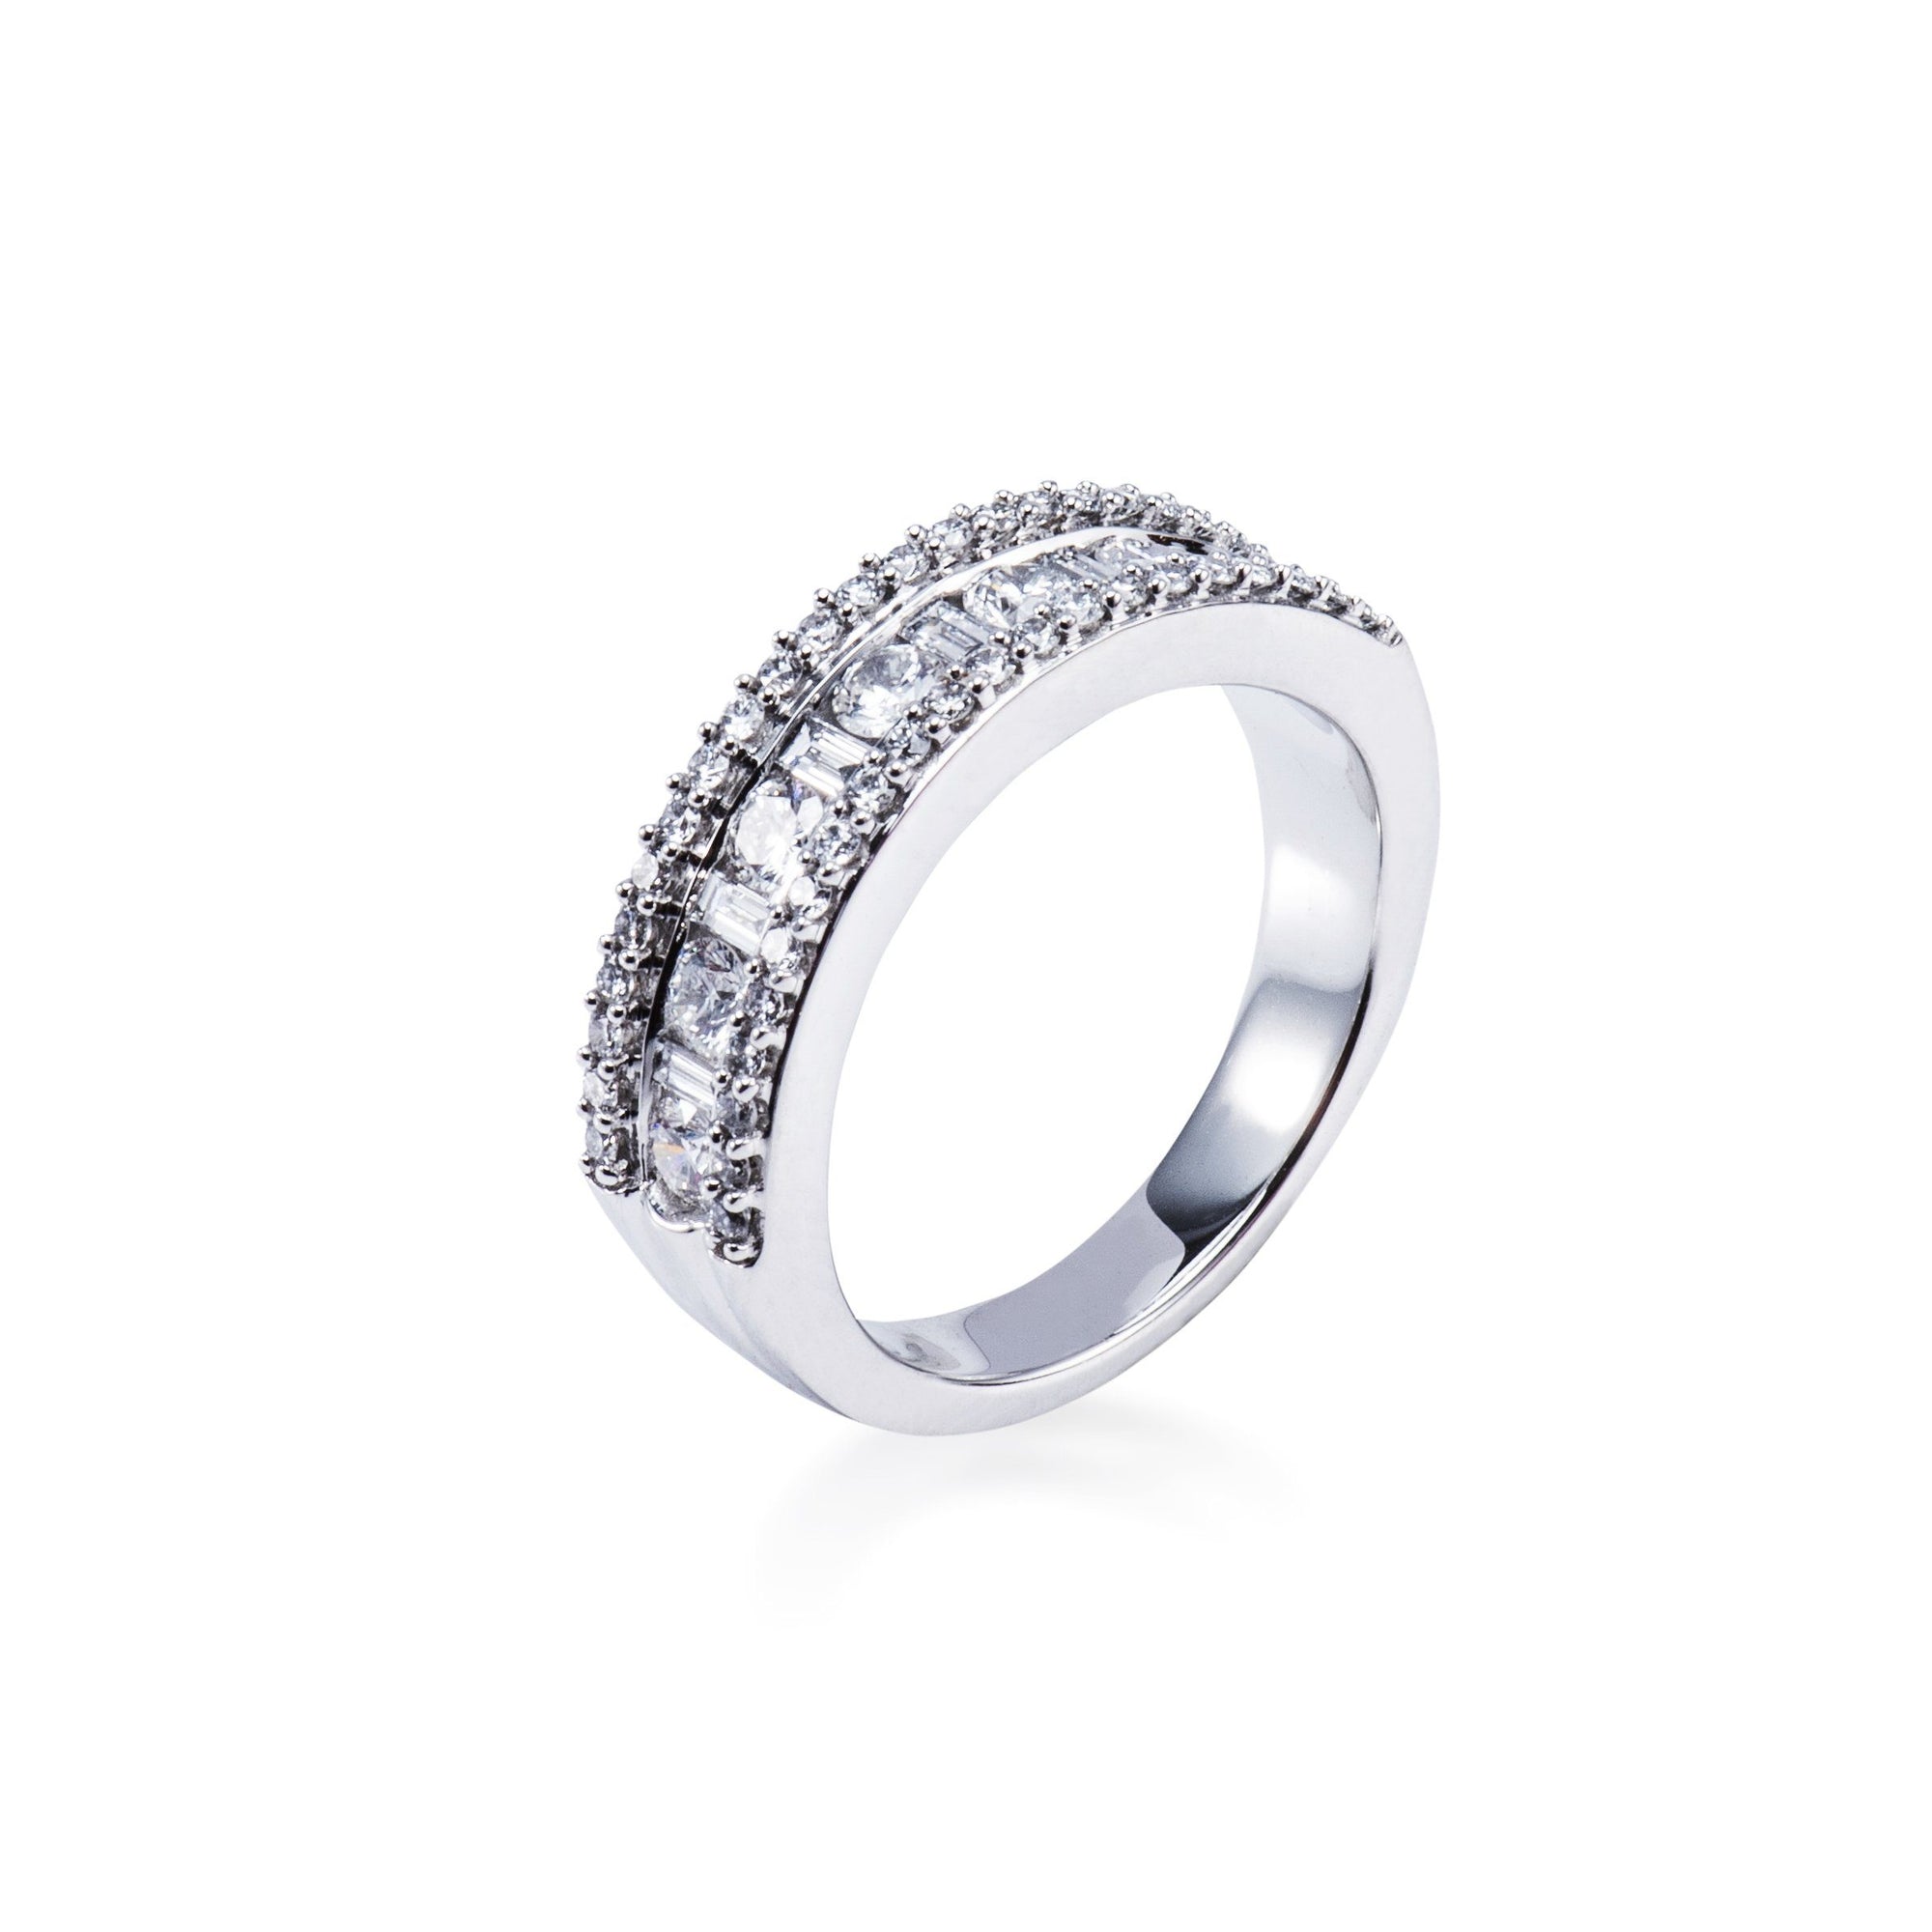 18CT WHITE GOLD DIAMOND ETERNITY RING CENTRE ROW ALTERNATE ROUND BRILLIANT AND BAGUETTE CUT DIAMONDS. EDGES FINISHED WITH ROWS OF ROUND BRILLIANT CUT DIAMONDS wedding ring, eternity ring Aces Jewellers 